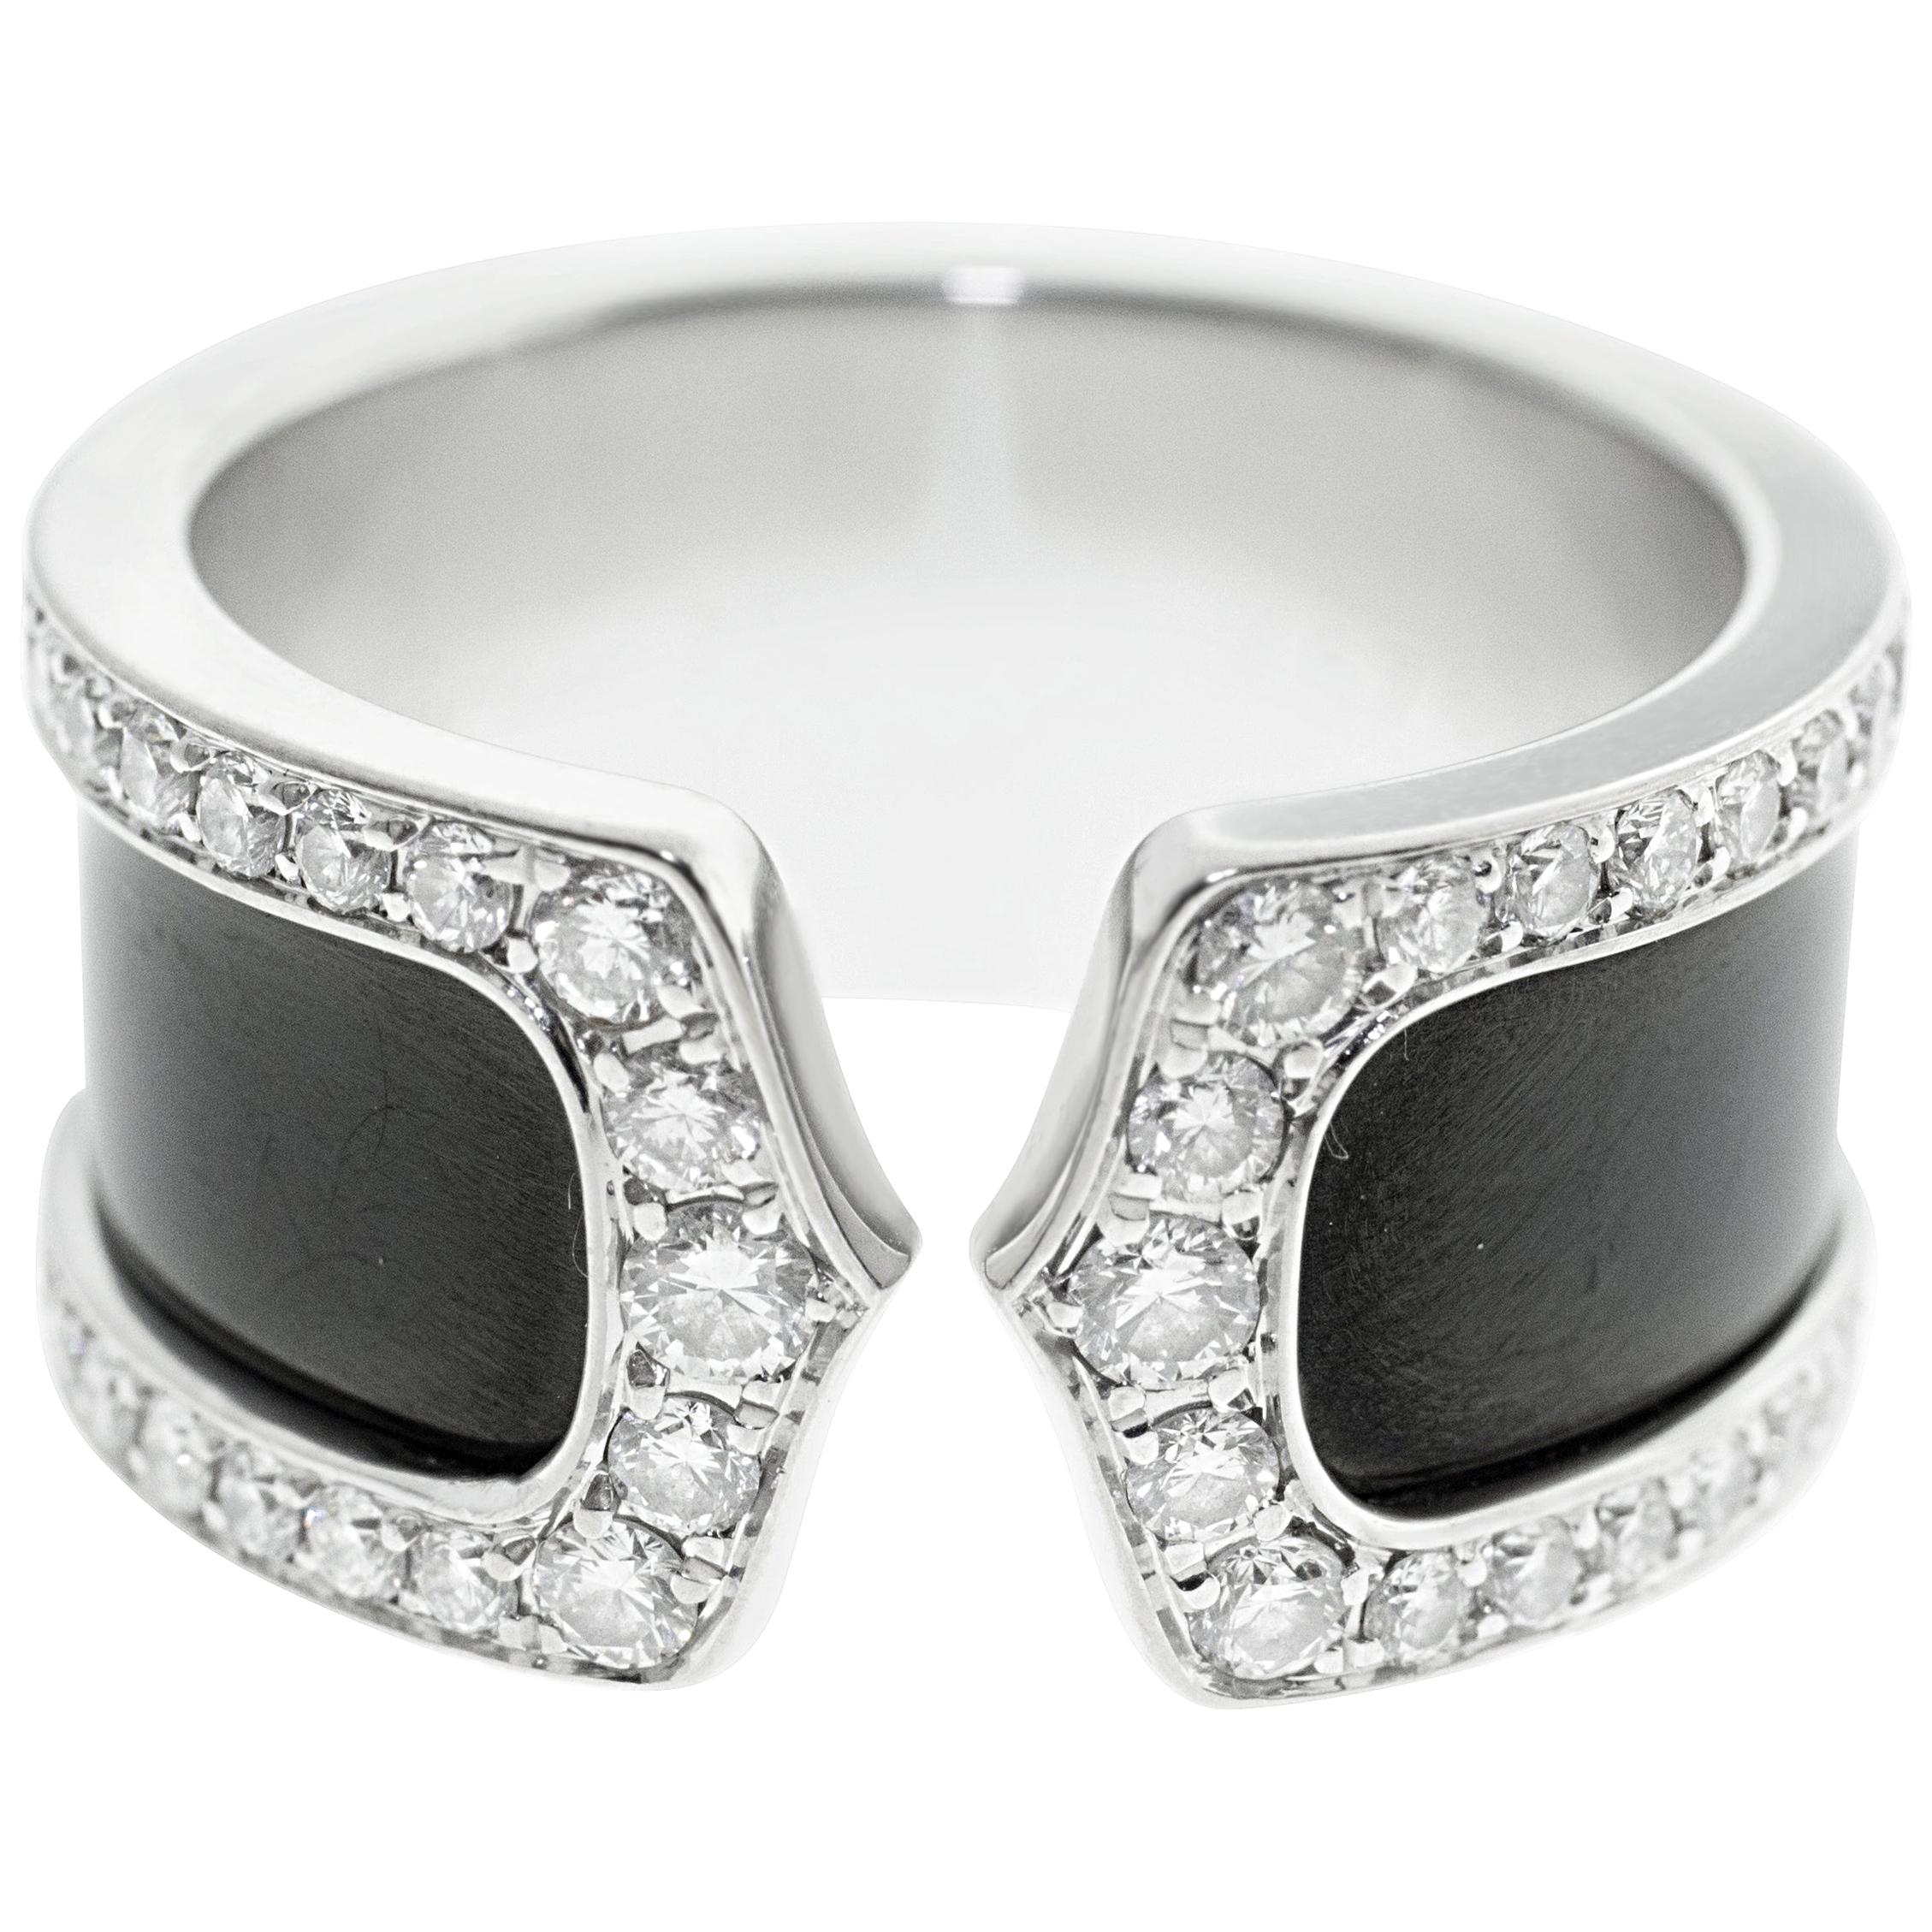 Cartier Double C Diamond and Enamel Ring